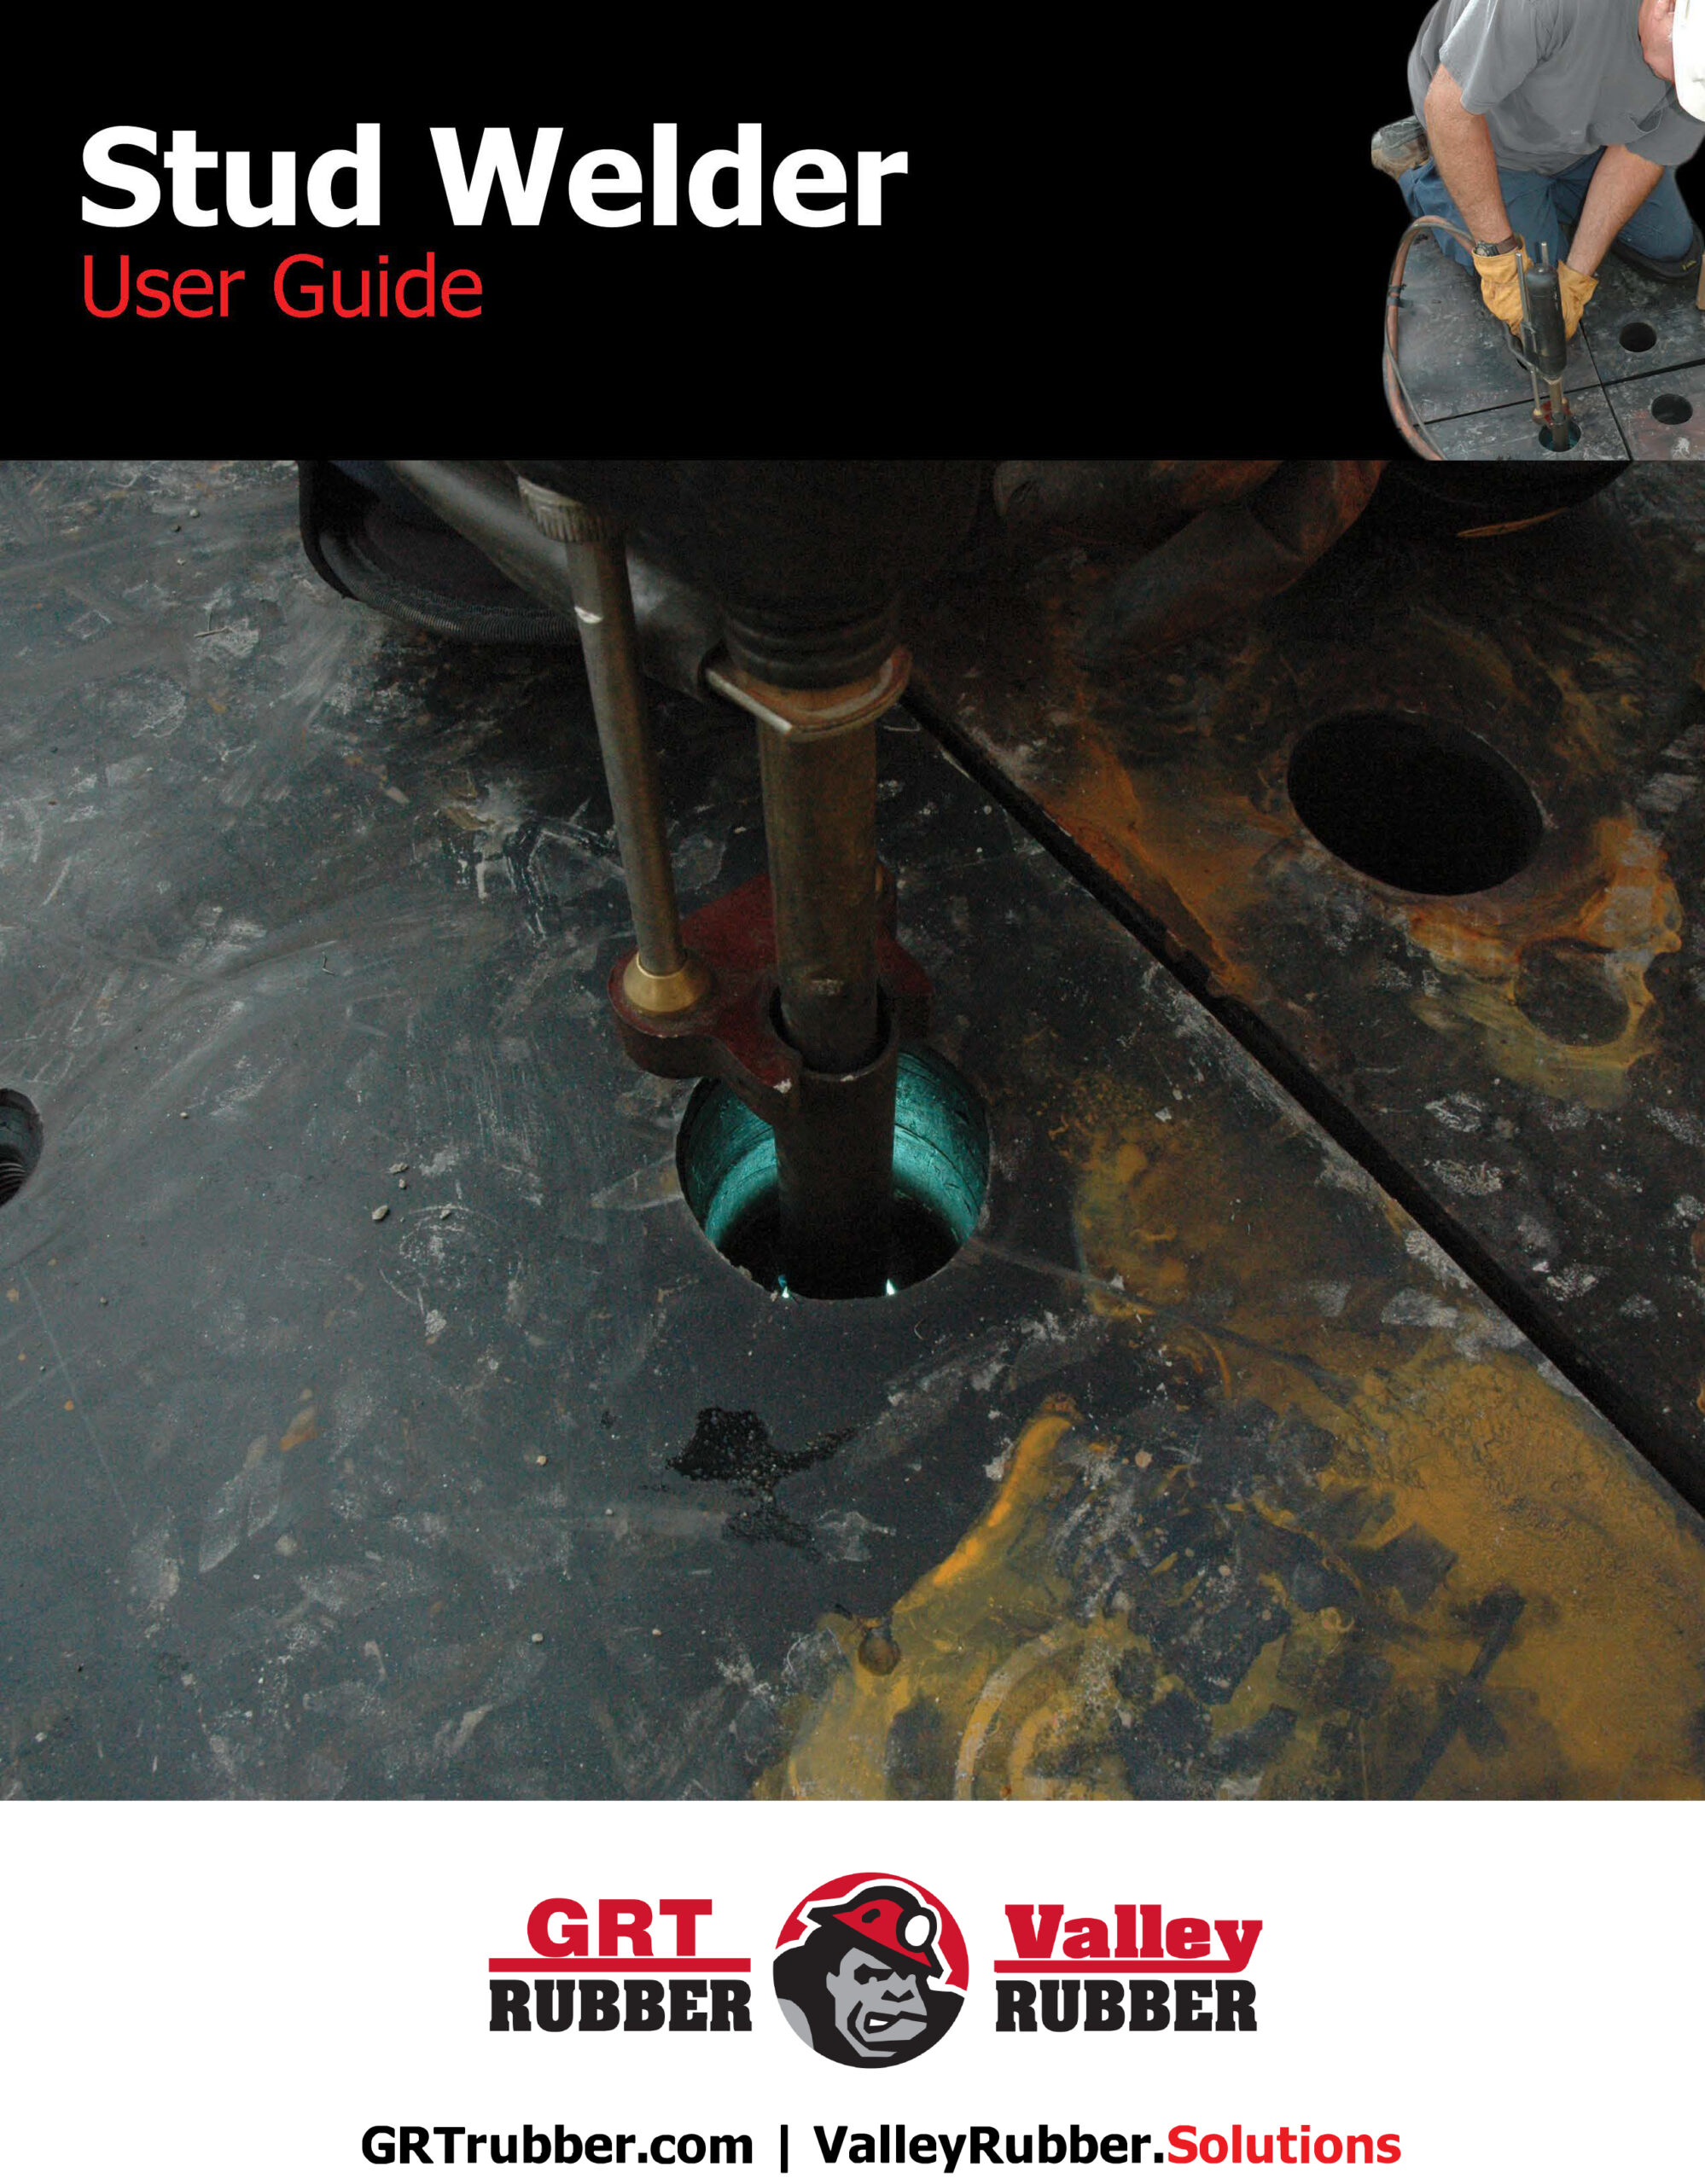 https://www.valleyrubber.solutions/wp-content/uploads/2023/01/Stud-Weld-User-Guide-scaled.jpg